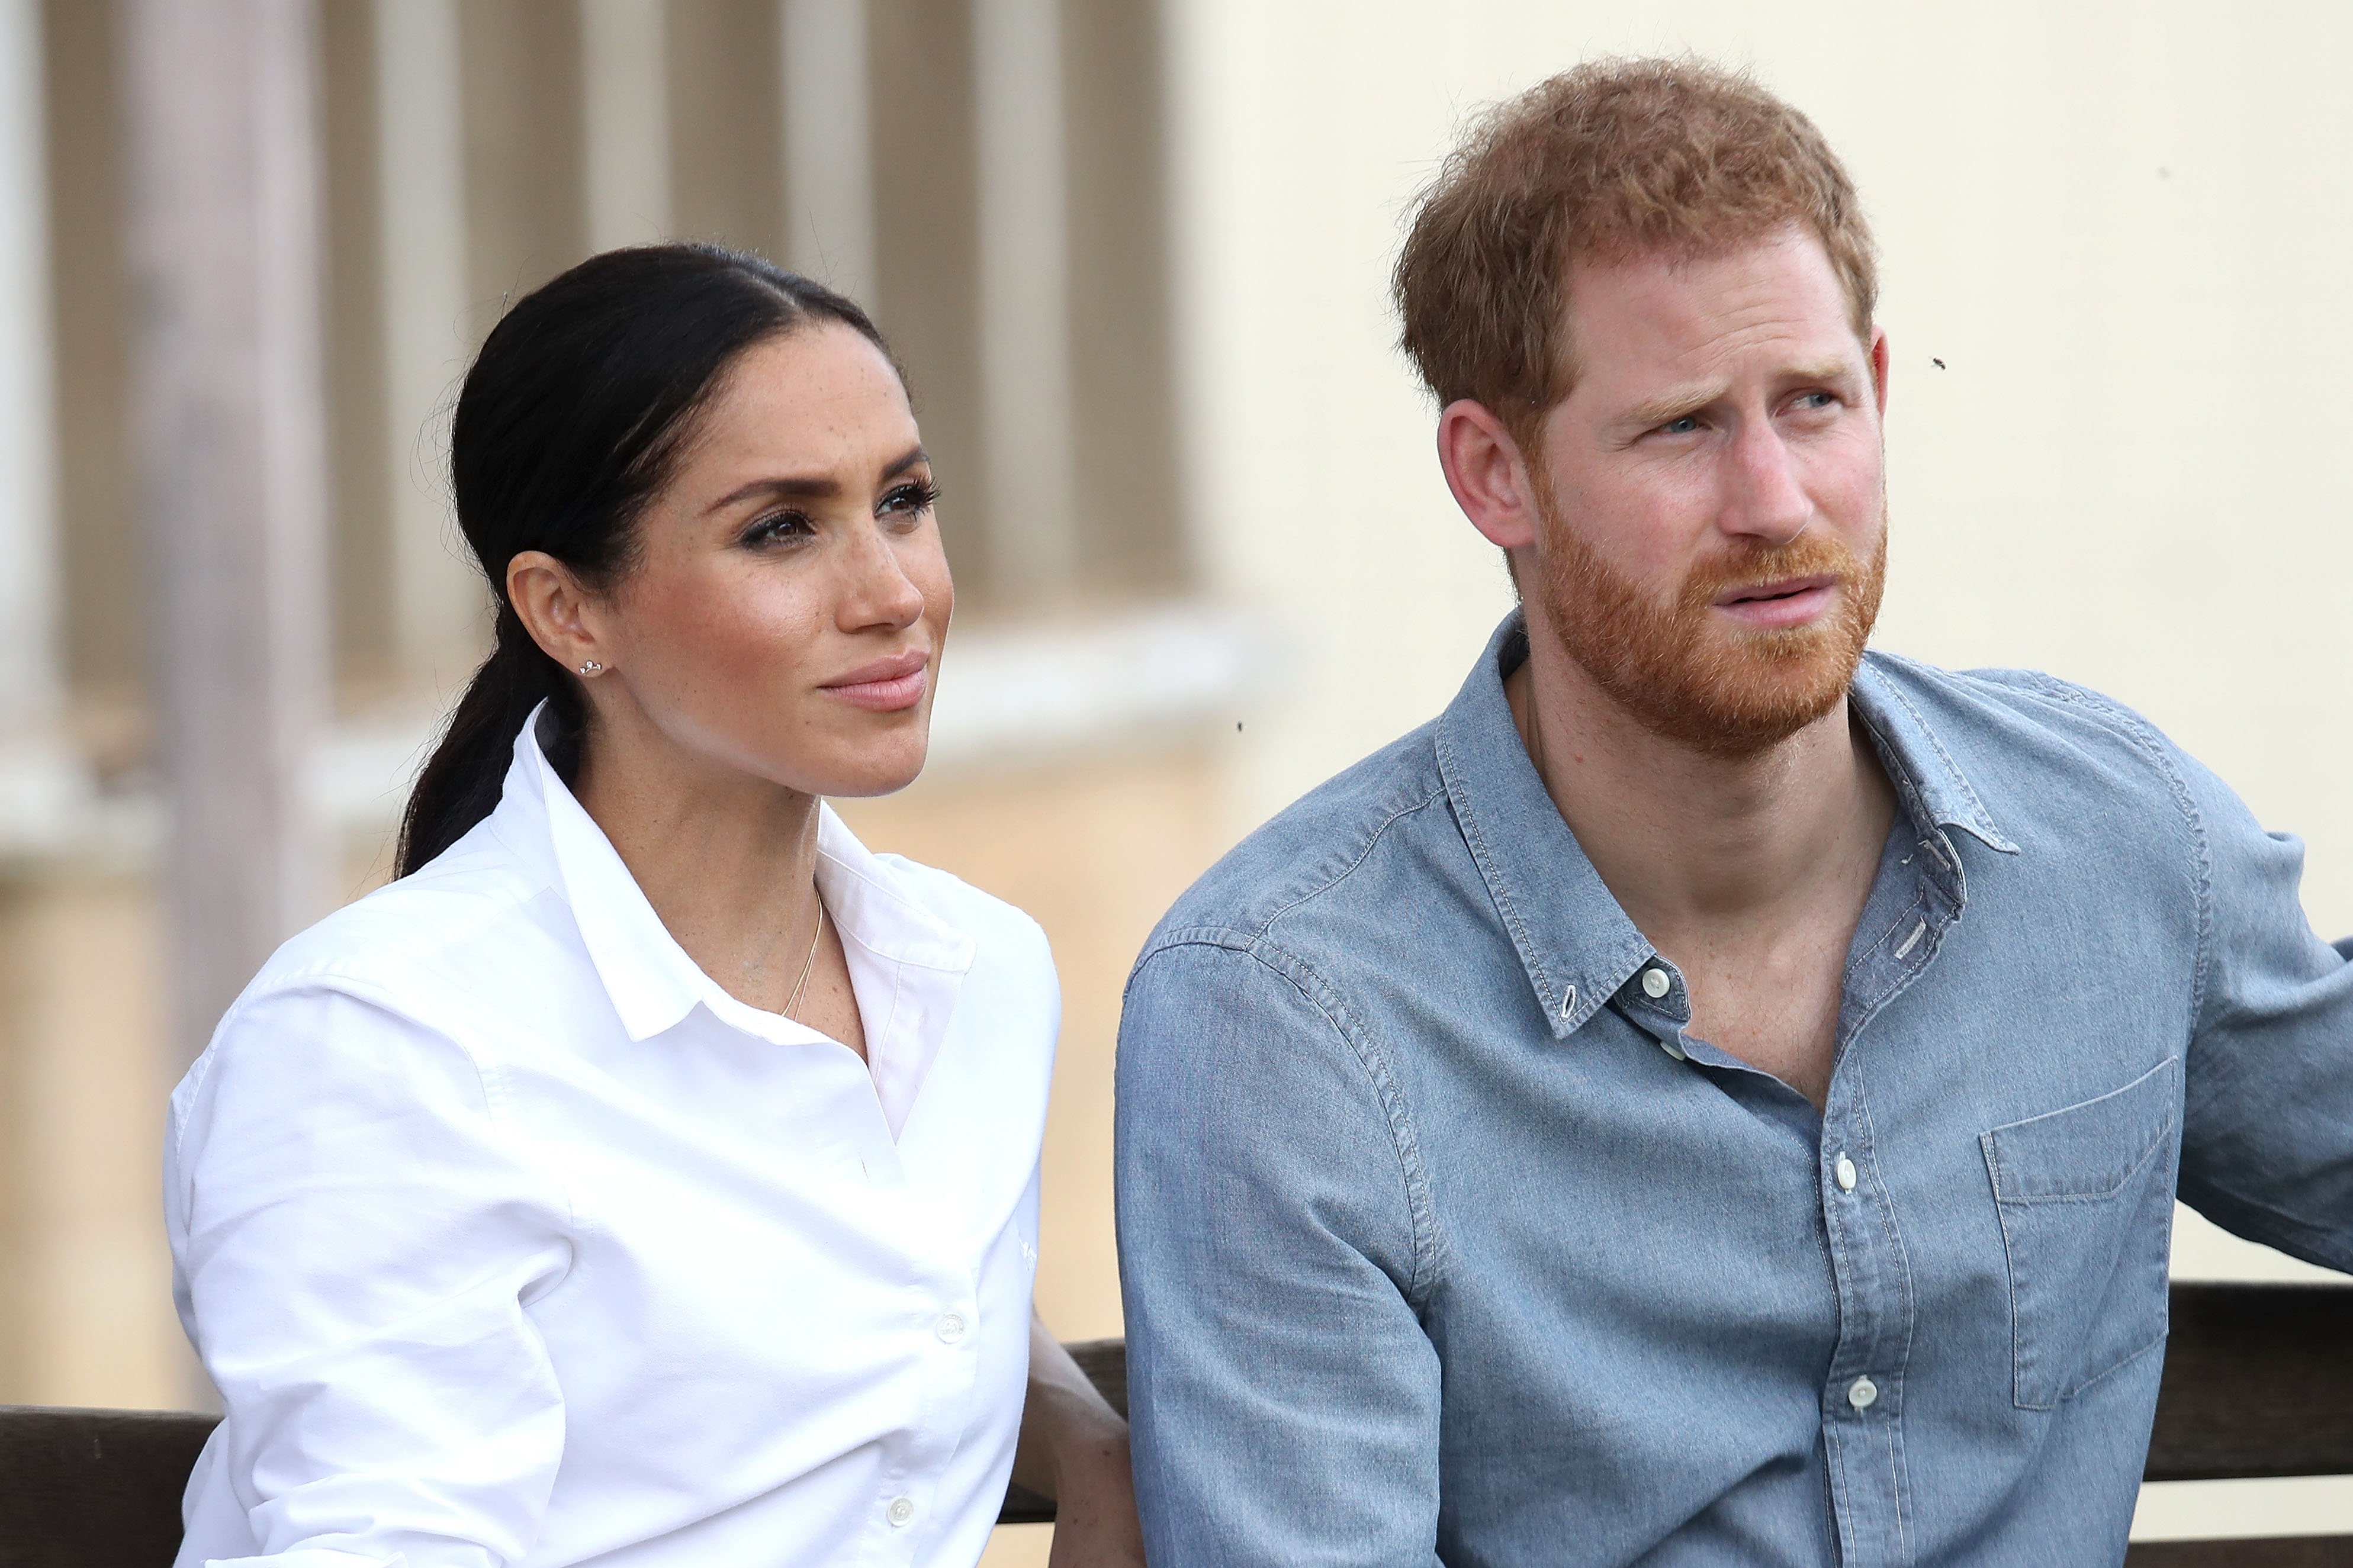 Prince Harry and his wife Meghan Markle at a local farming family, the Woodleys, on October 17, 2018 in Dubbo, Australia. | Source: Getty Images